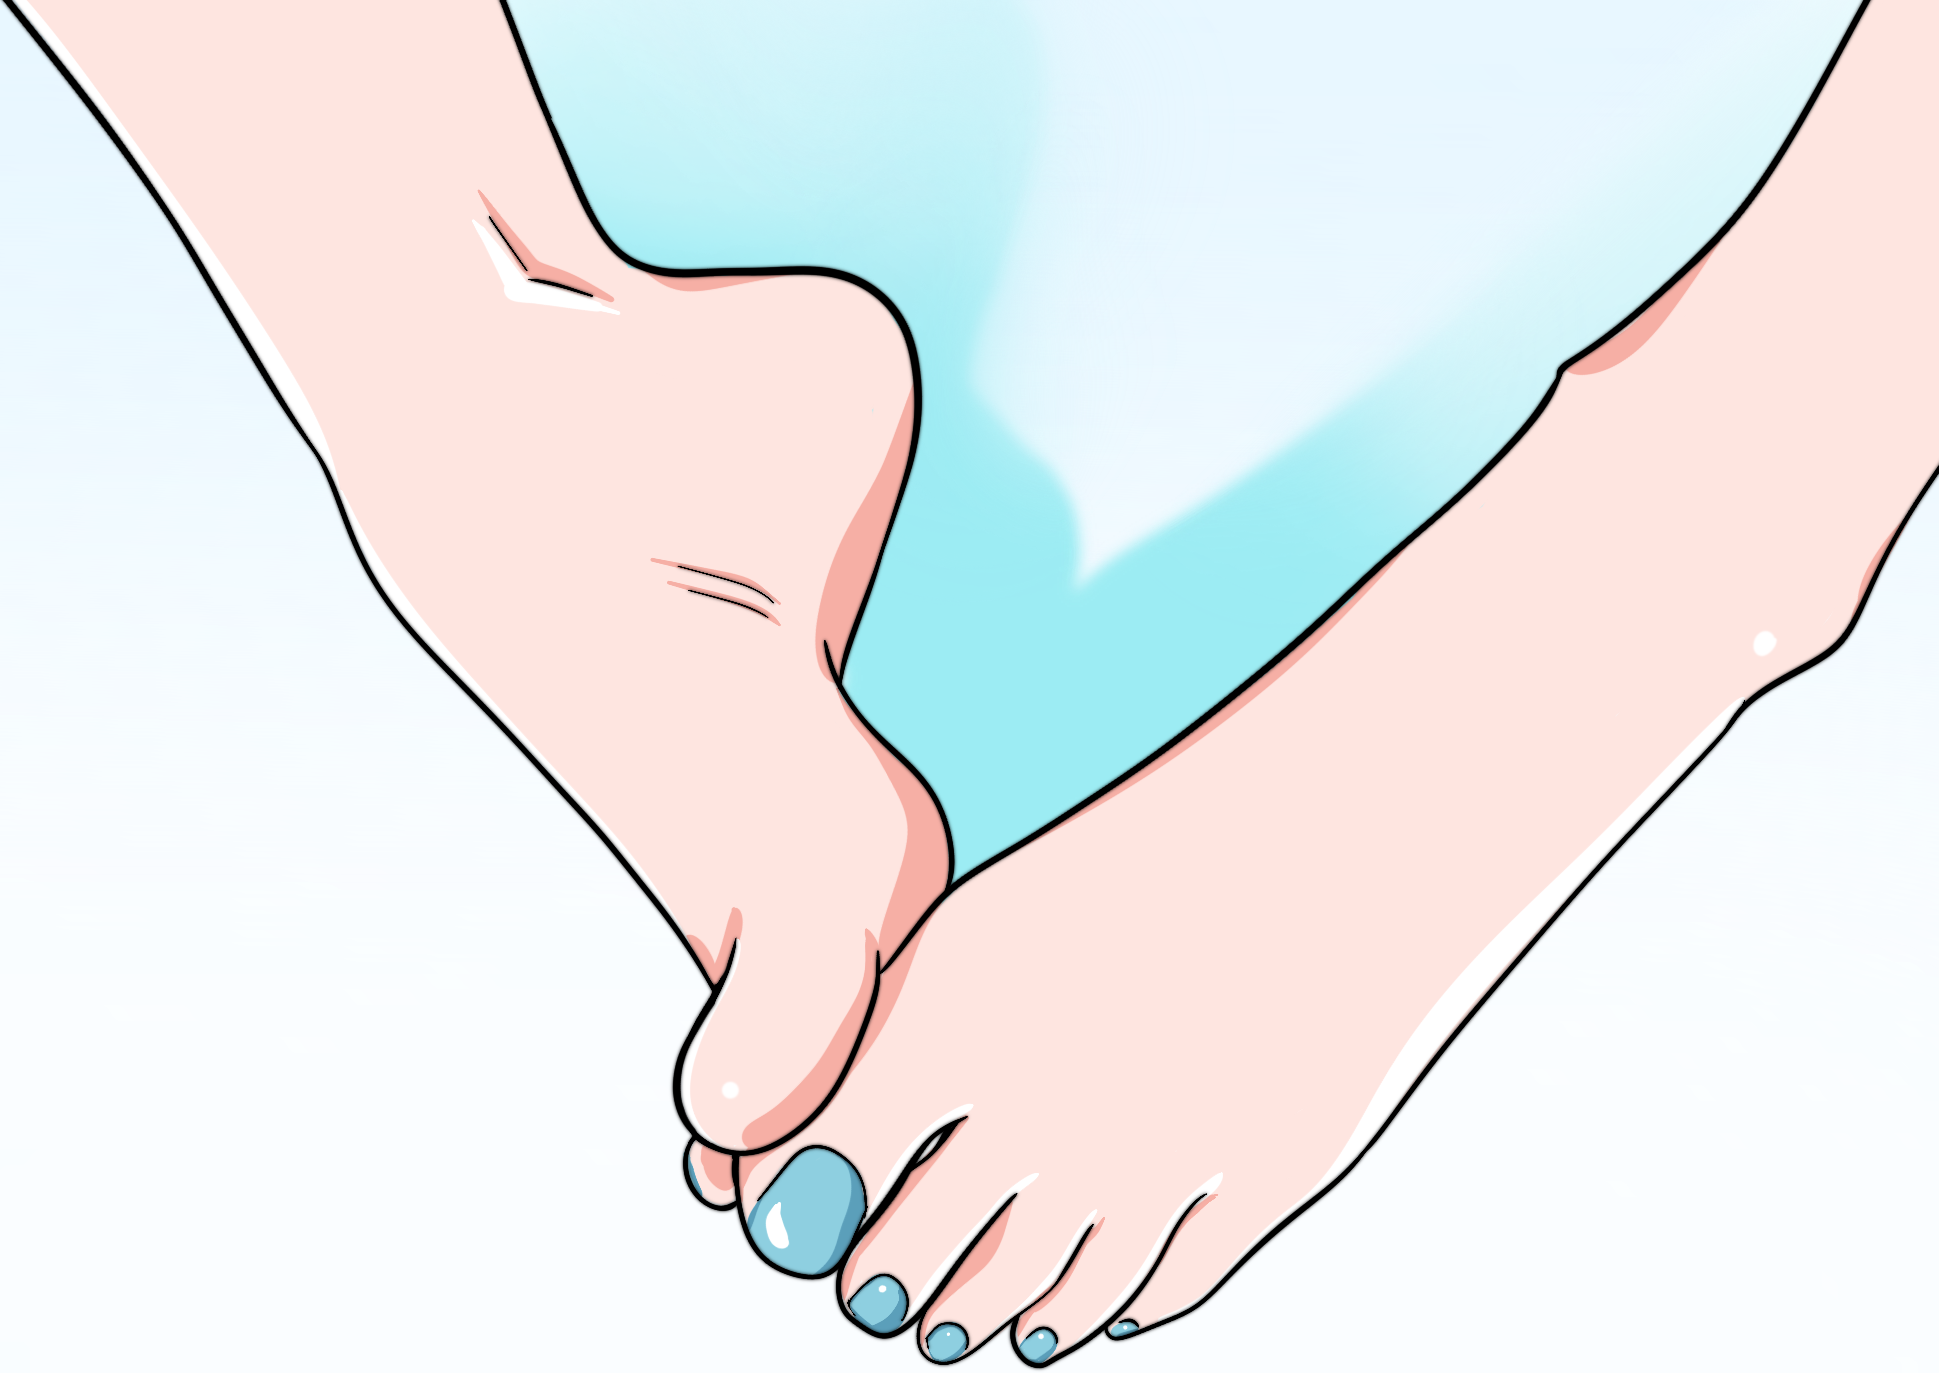 General 1939x1373 cel shaded simple background PixelMang feet foot sole closeup foot fetishism